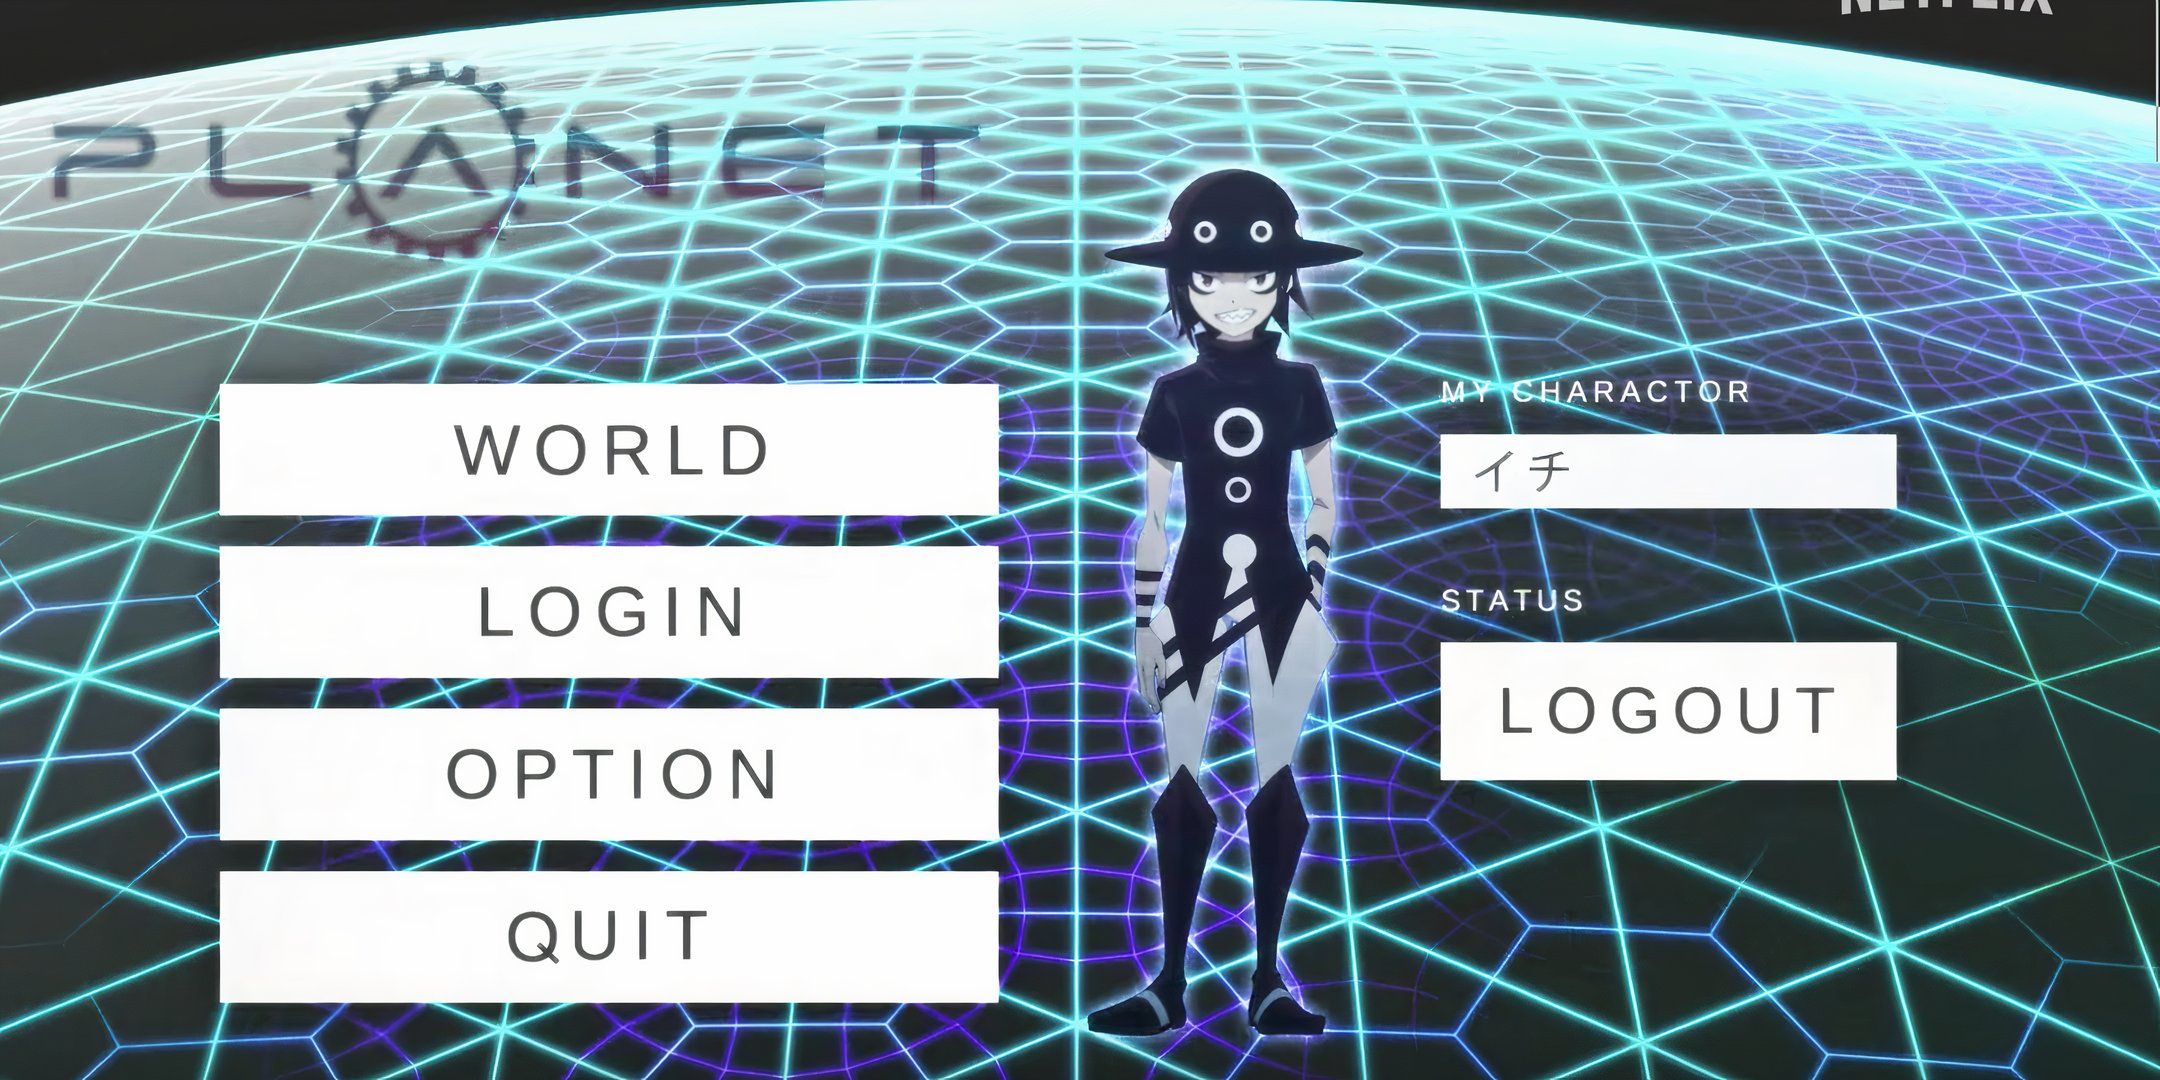 Planet log-in screen featuring the character of Ichi.